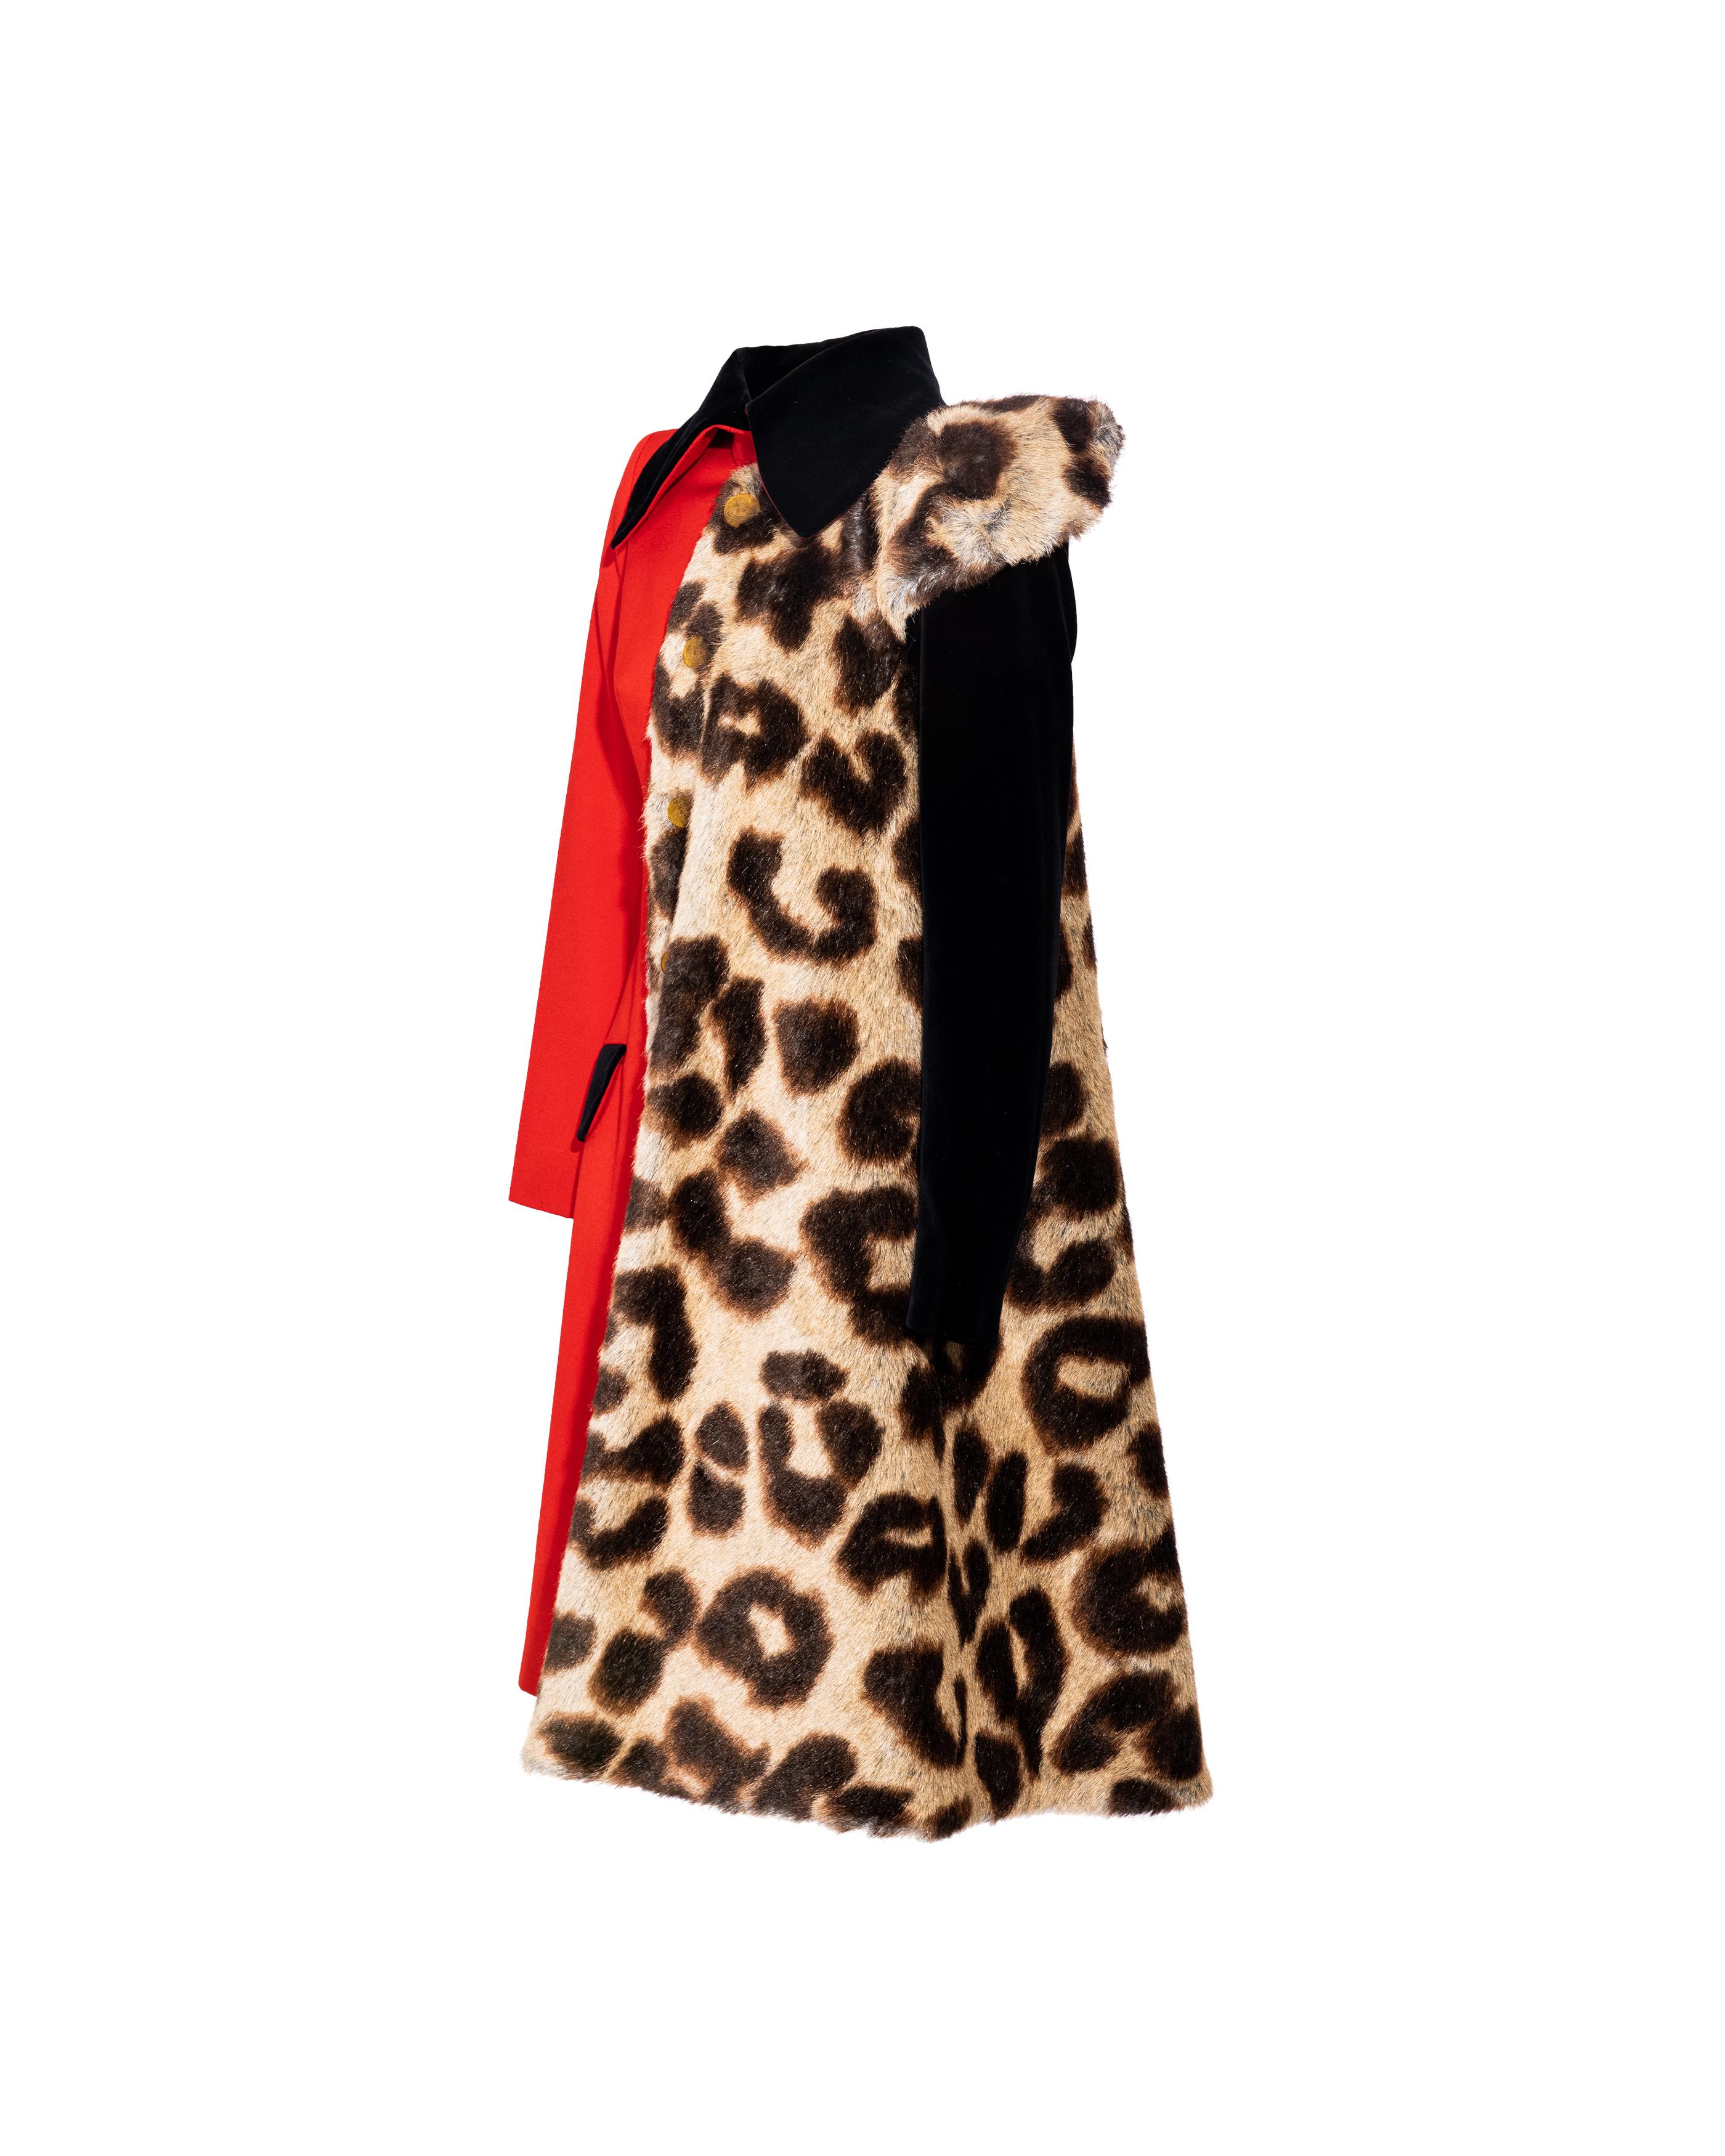 A/W 1996 Vivienne Westwood Red and Leopard Print Contrast Coat In Excellent Condition For Sale In North Hollywood, CA